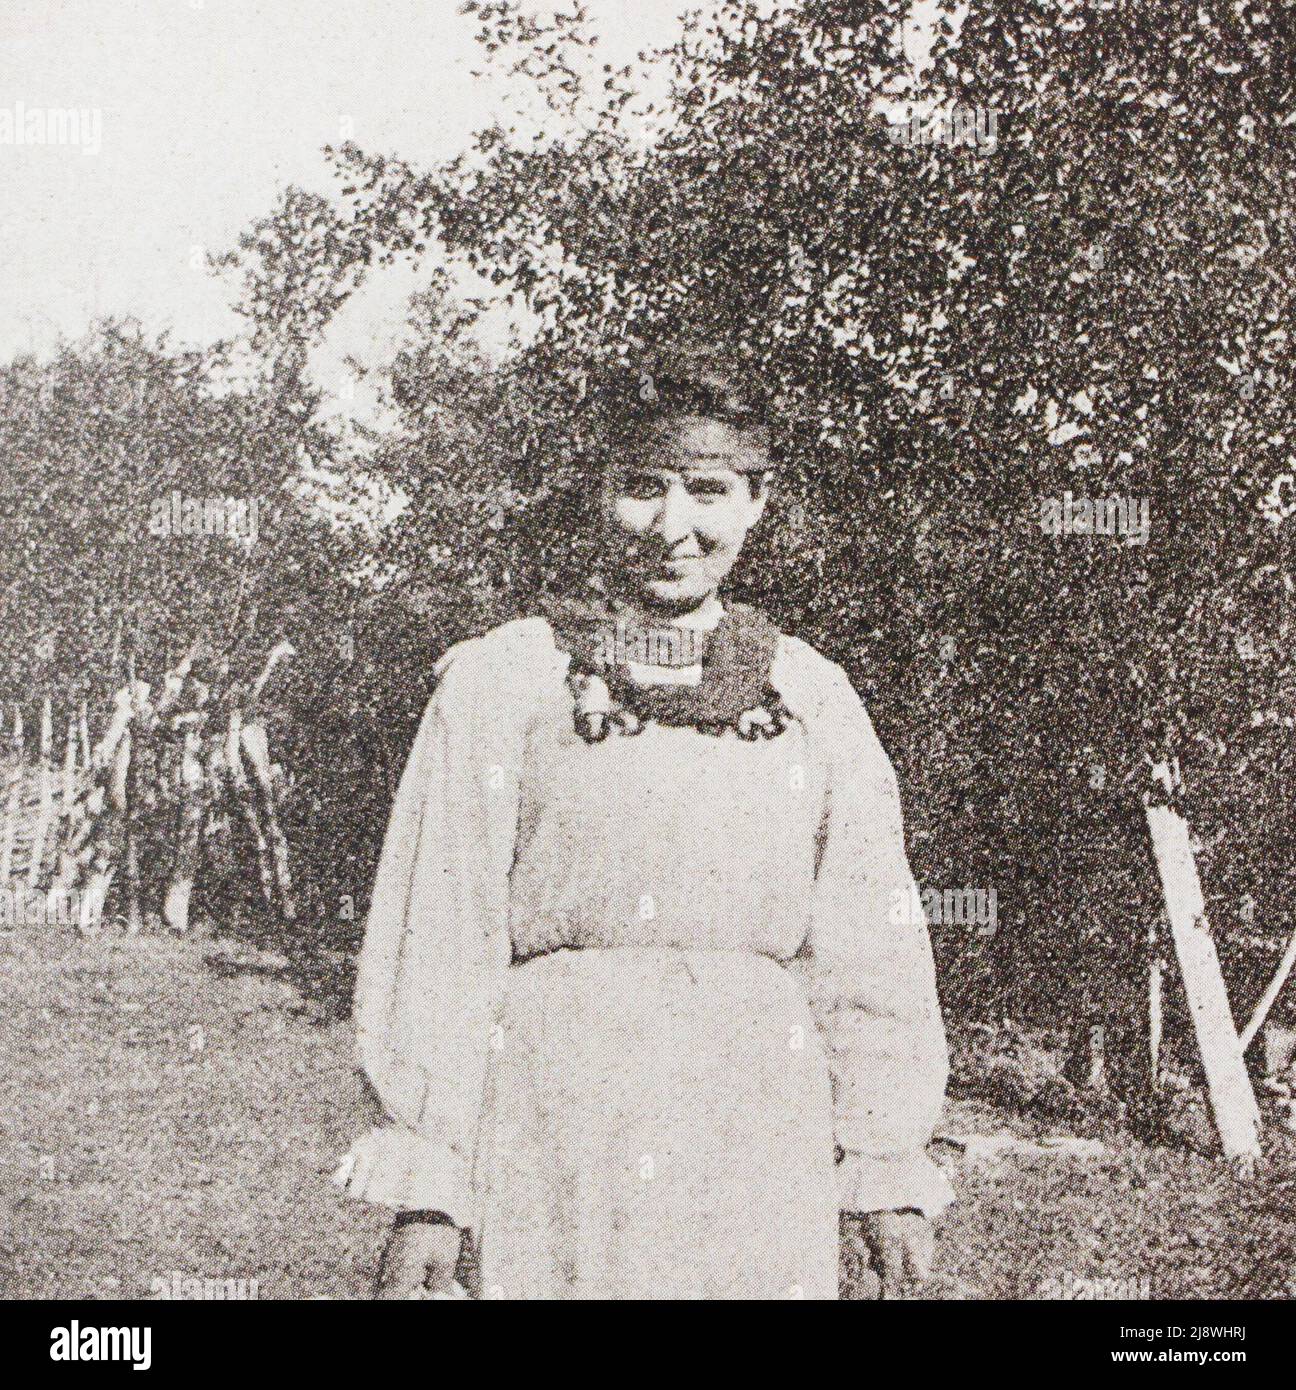 Abkhazian peasant woman from the village of Barmysh in the Transcaucasus. Photo from the beginning of the 20th century. Stock Photo